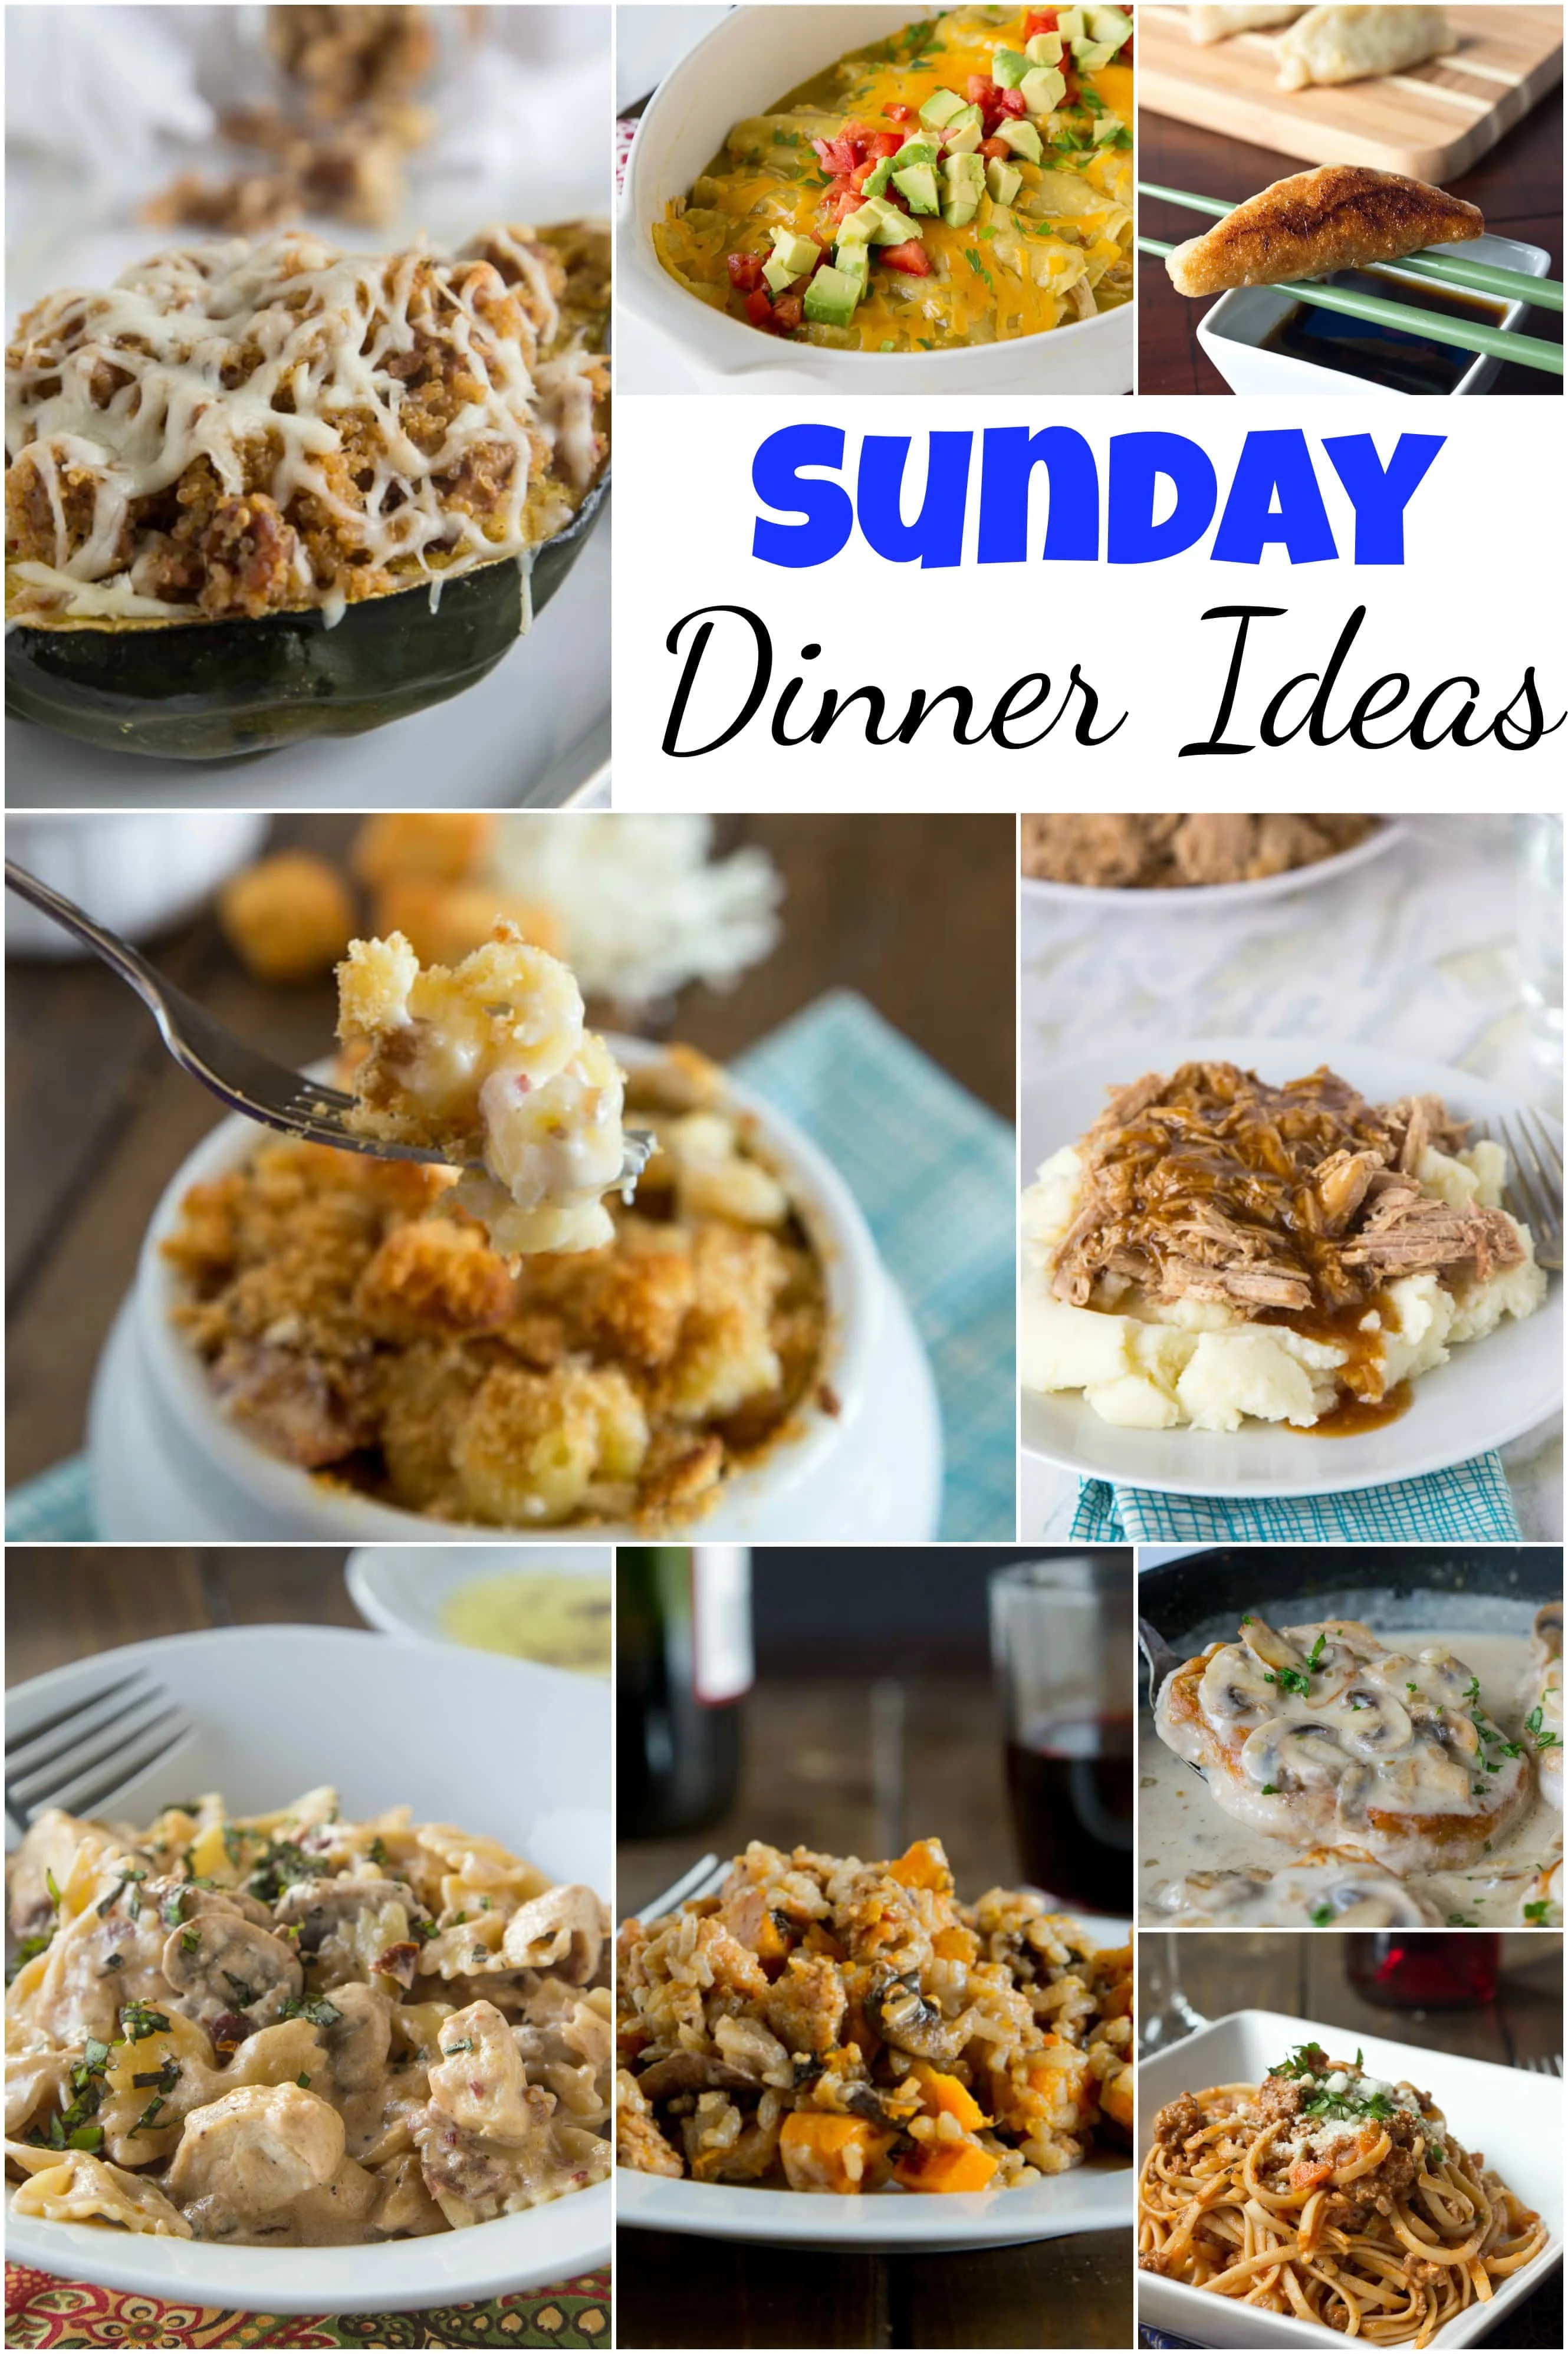 Dinner Recipes Archives - Page 20 of 36 - Dinners, Dishes, and Desserts